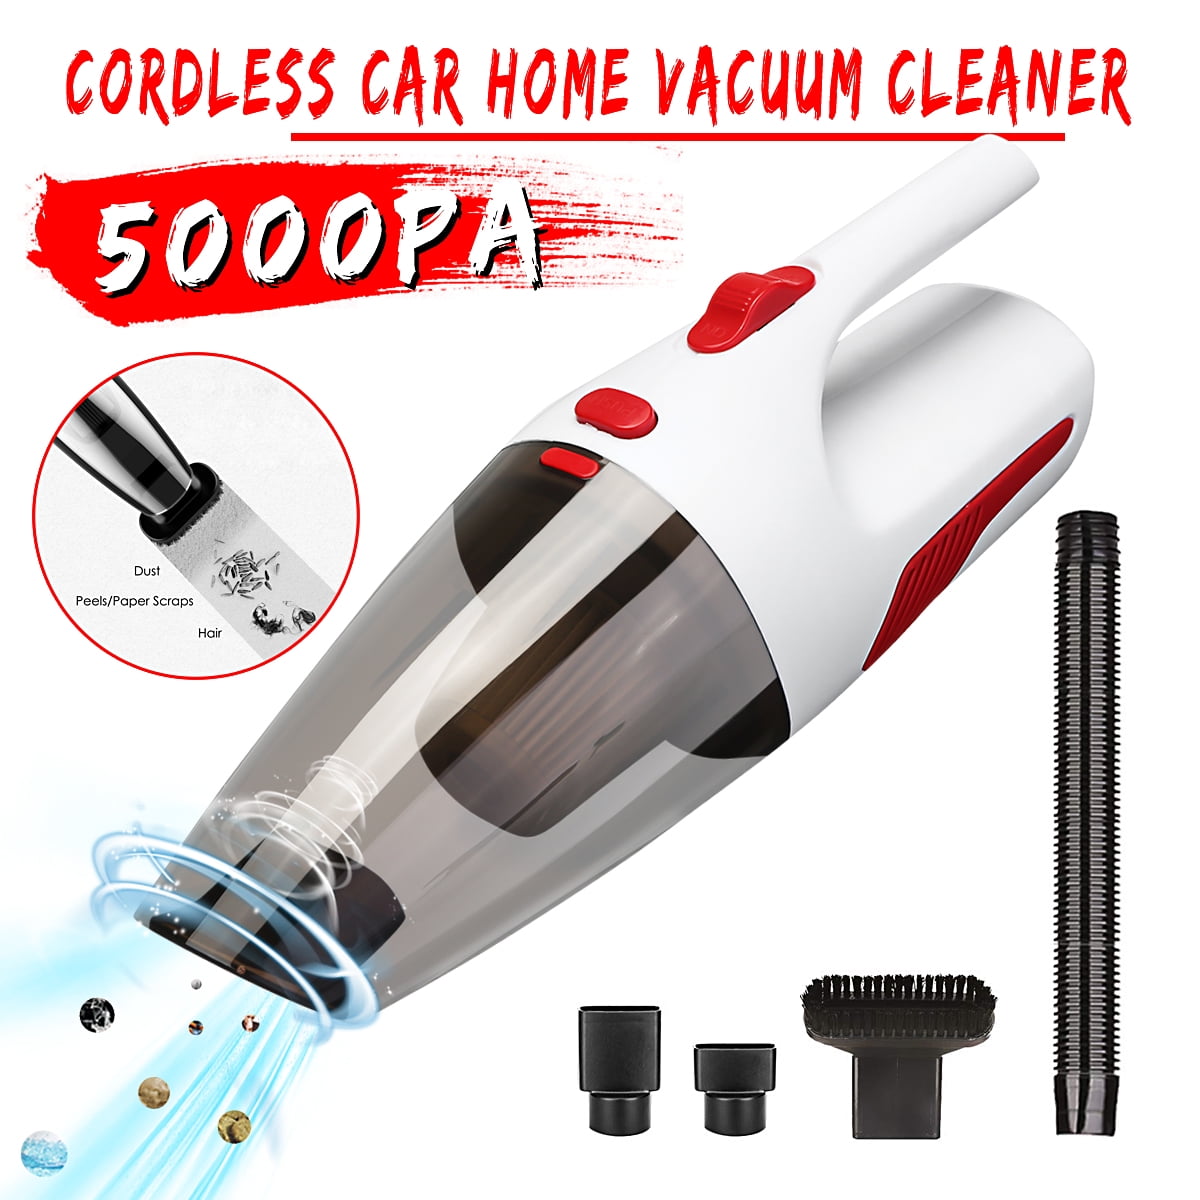 120W Car Vacuum Cleaner Wet Dry 12V Cordless Handheld Home Portable Dust Clean!! 